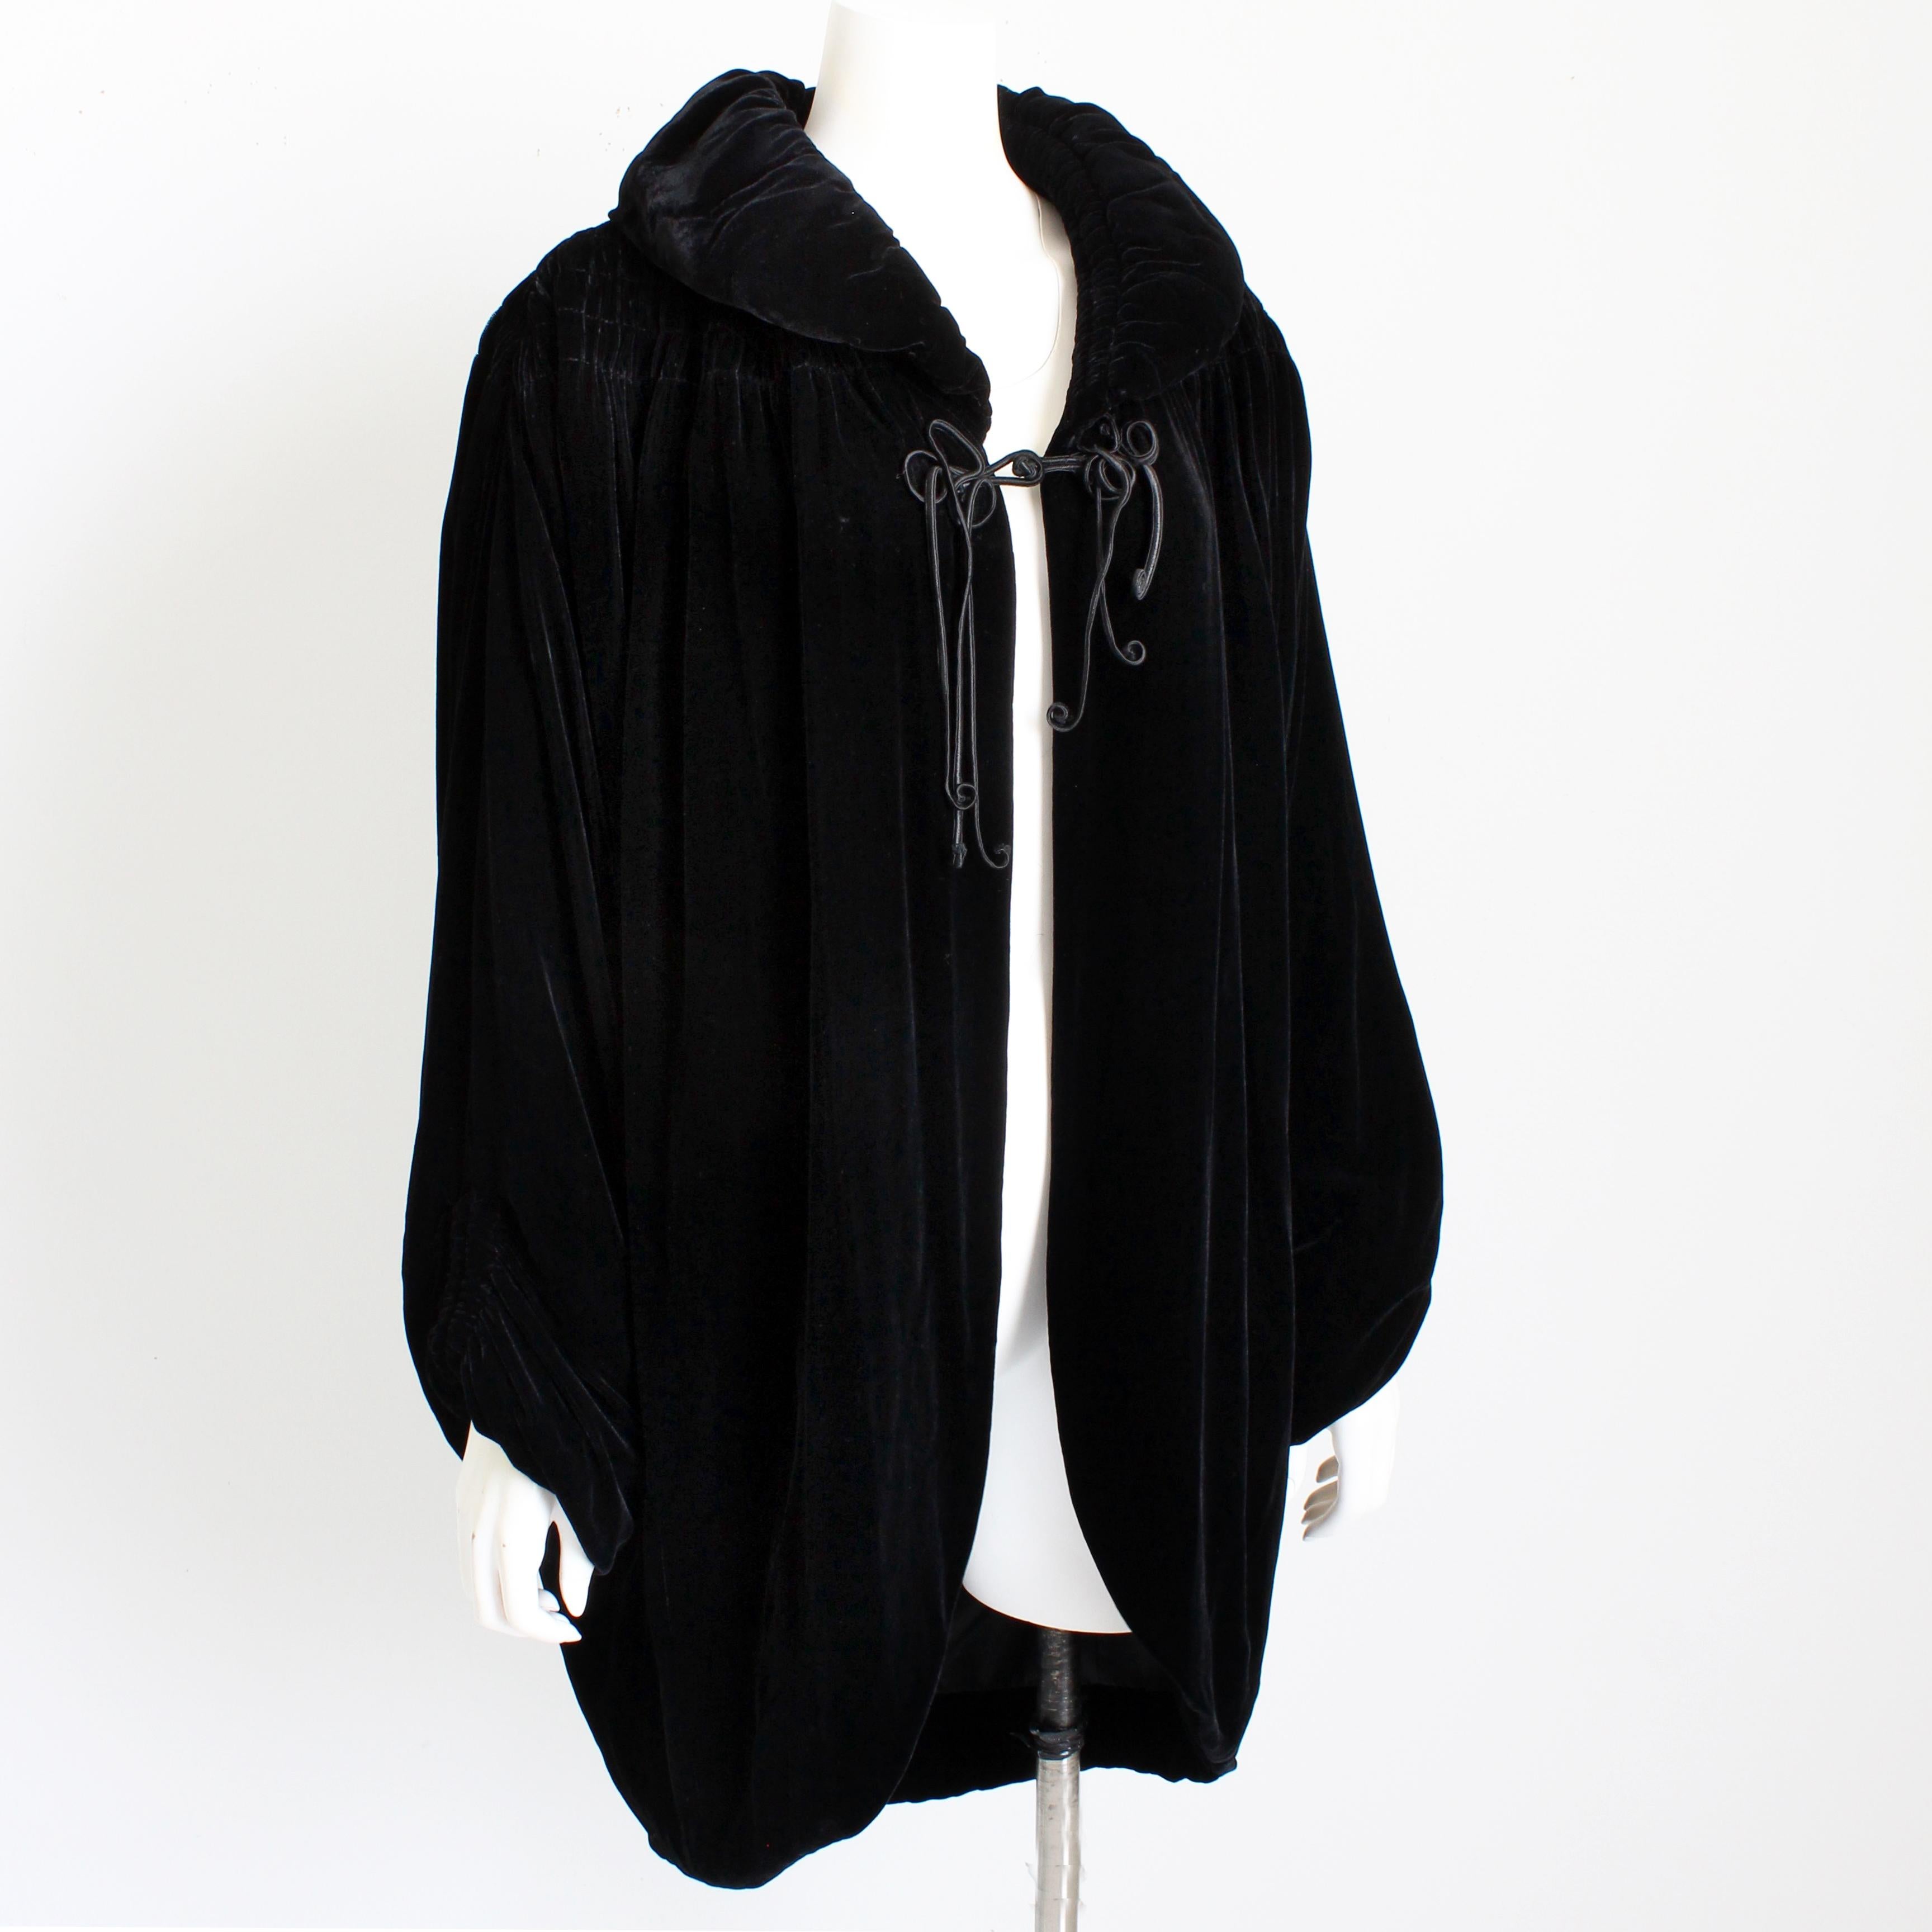 Preowned, vintage Norma Kamali OMO cocoon style jacket, likely made in the early 1990s.  Made from black silk/rayon blend velvet, this fabulous jacket features huge batwing sleeves with shirring at the yoke and sleeve bottoms.  It fastens with a